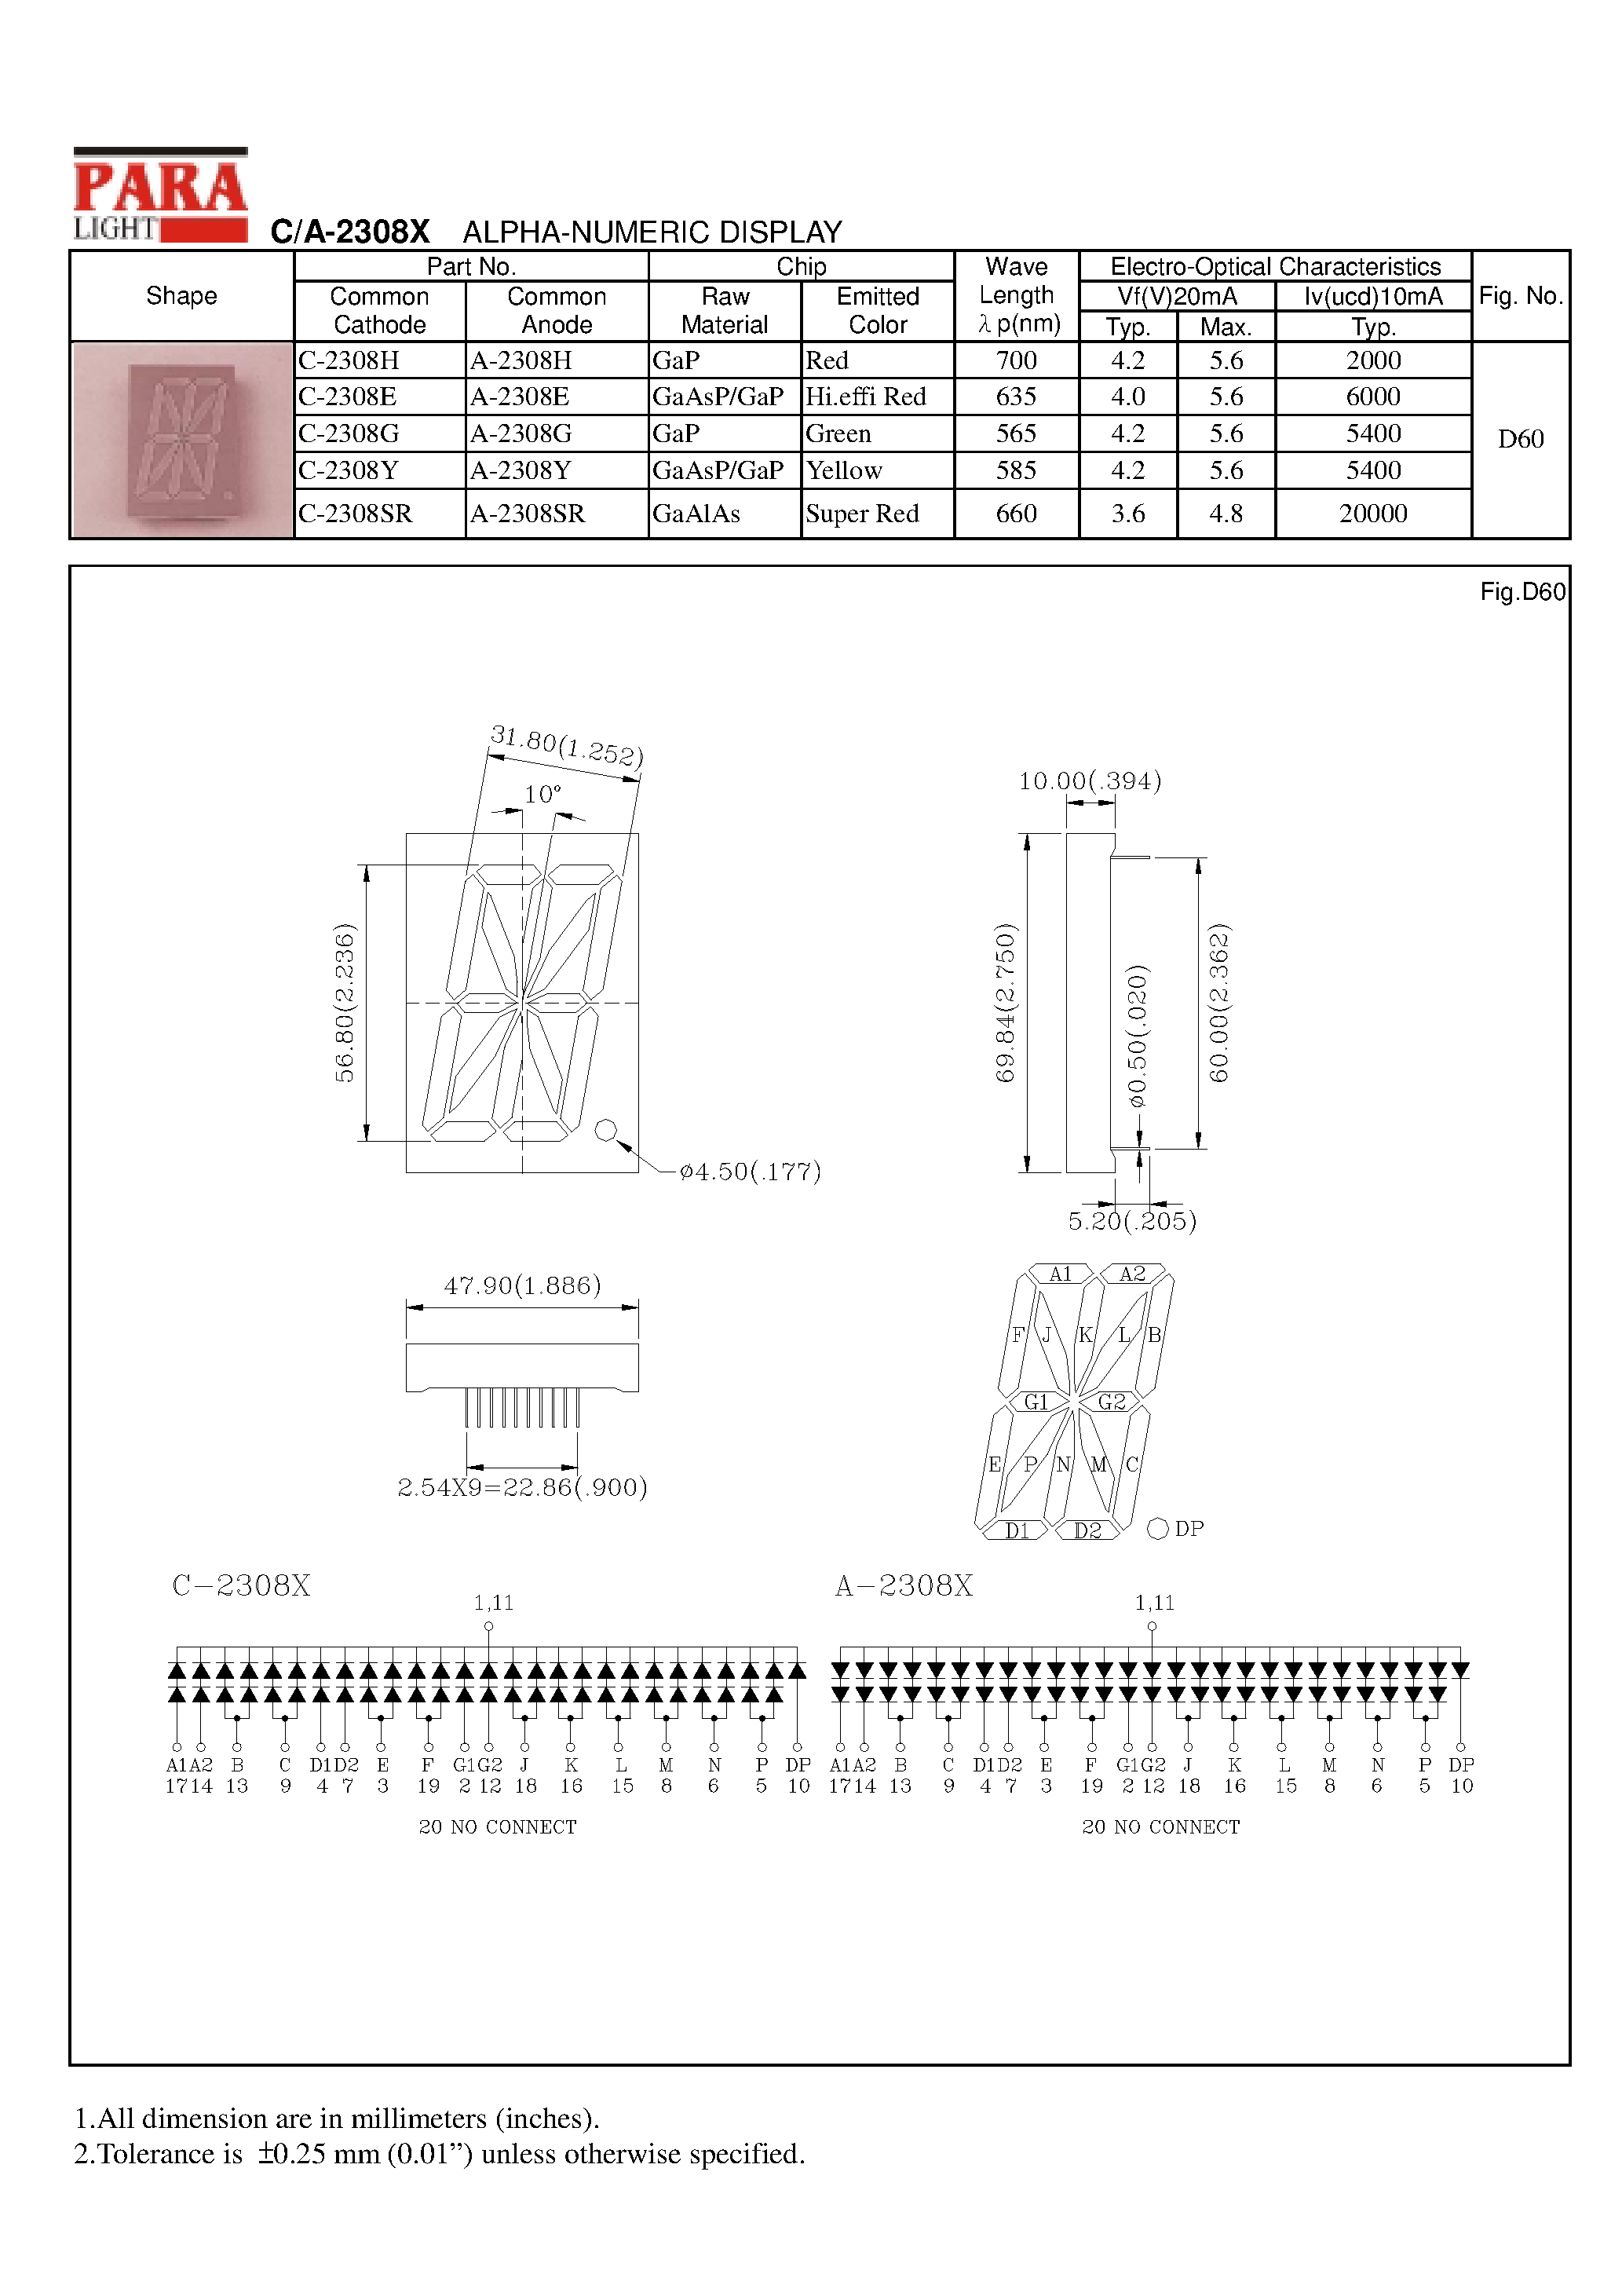 Datasheet A-2308H - ALPHA-NUMERIC DISPLAY page 1